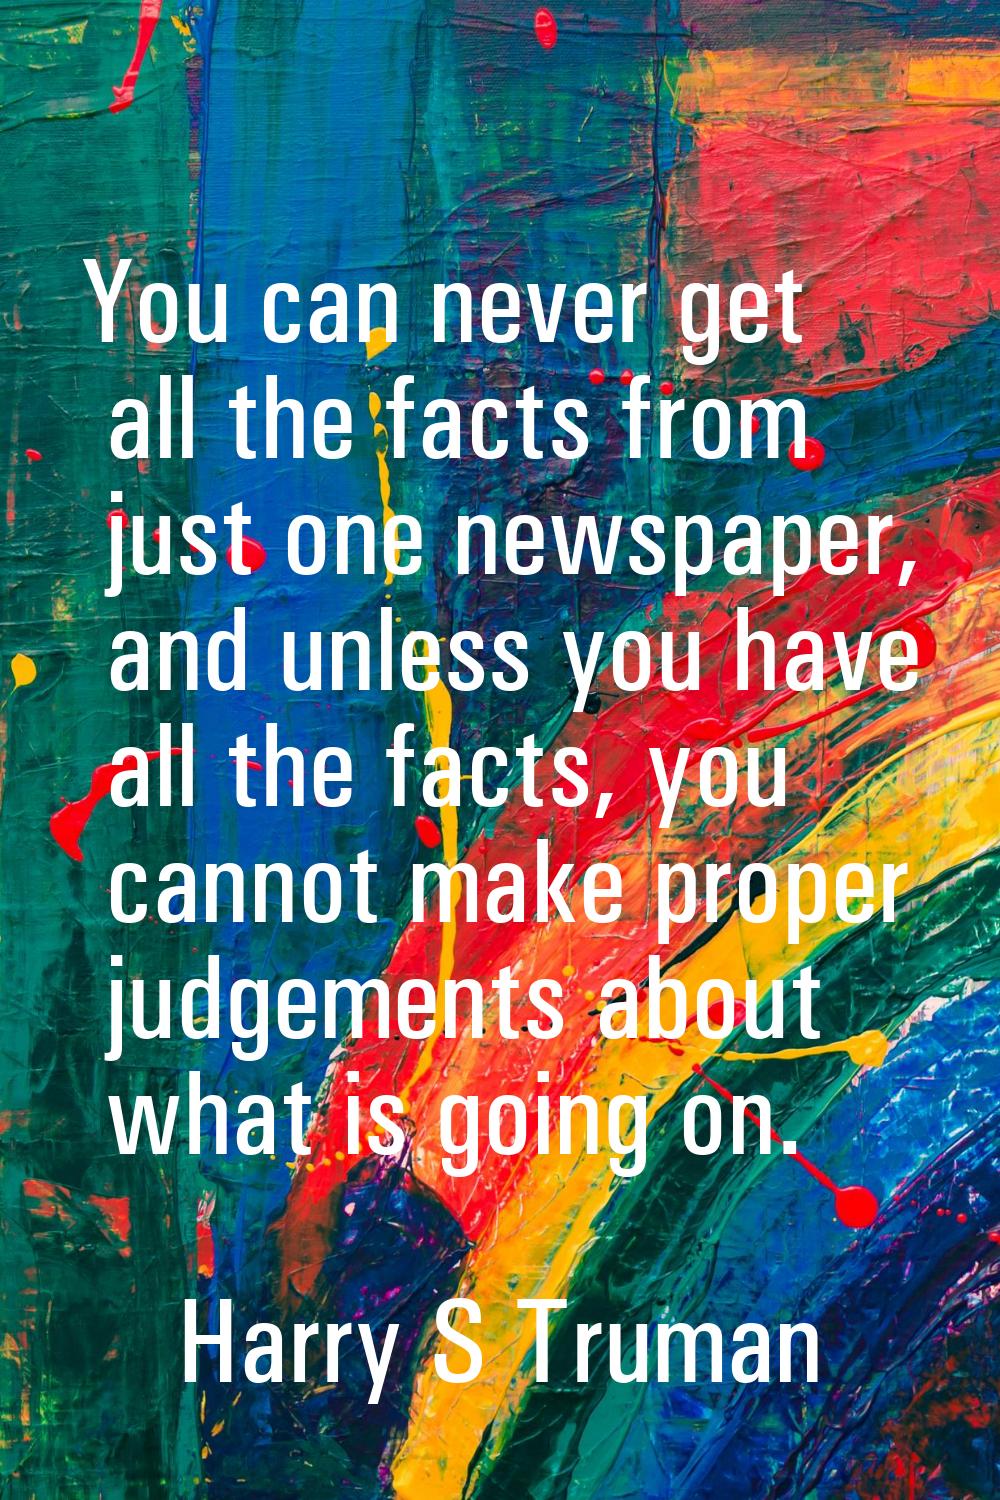 You can never get all the facts from just one newspaper, and unless you have all the facts, you can